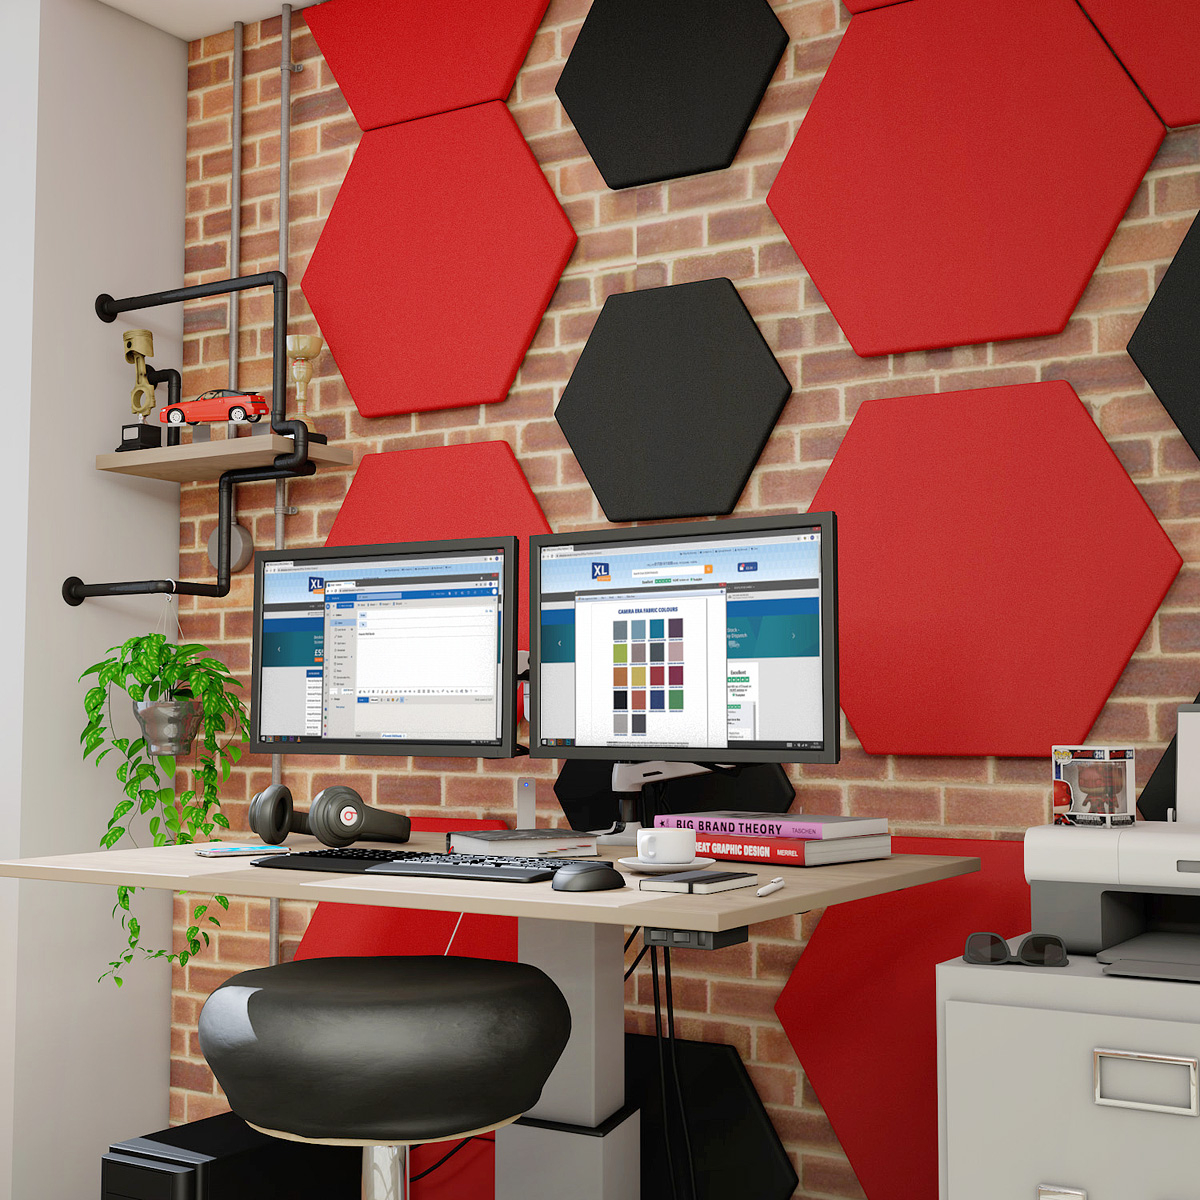 ZAGATO™ Hexagonal Acoustic Wall Panelling Help Reduce Noise and Office Distractions